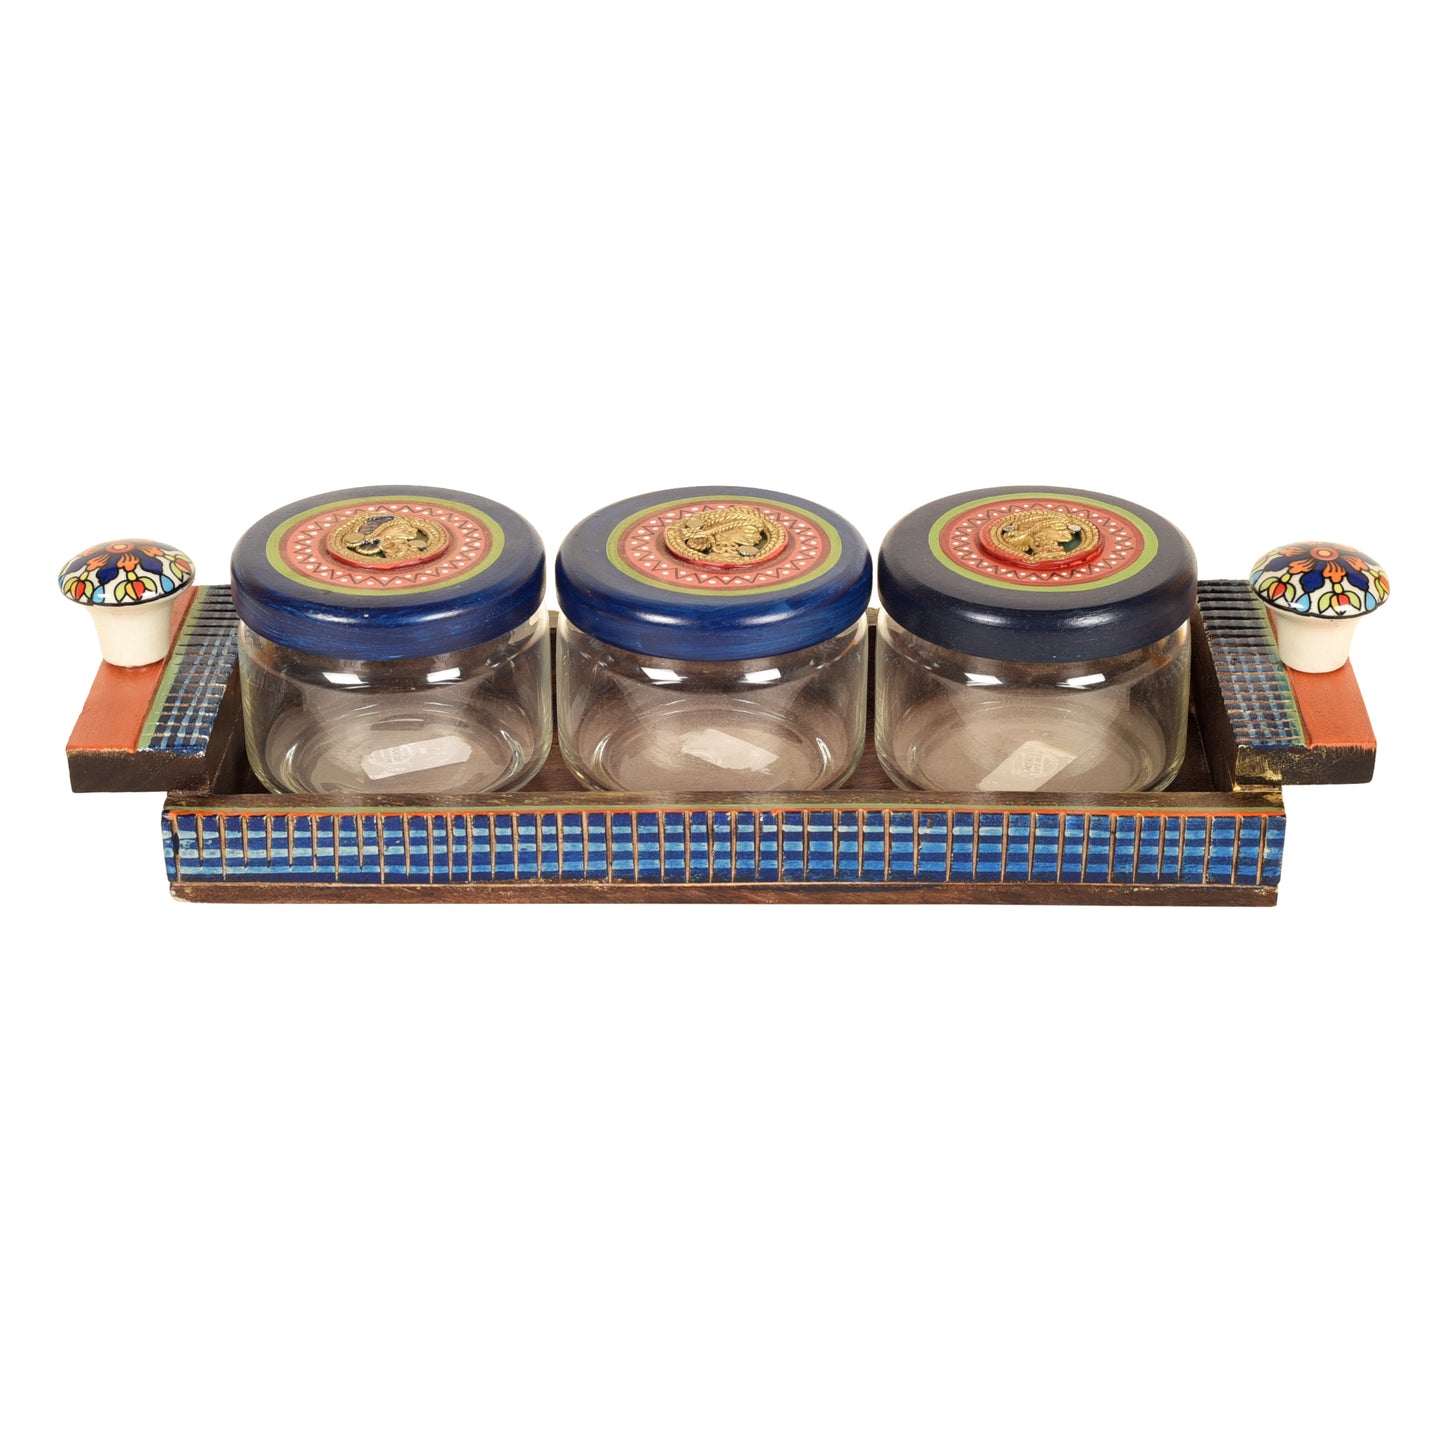 Handrcafted Storage 3 Jars and 1 Tray (Set of 4)